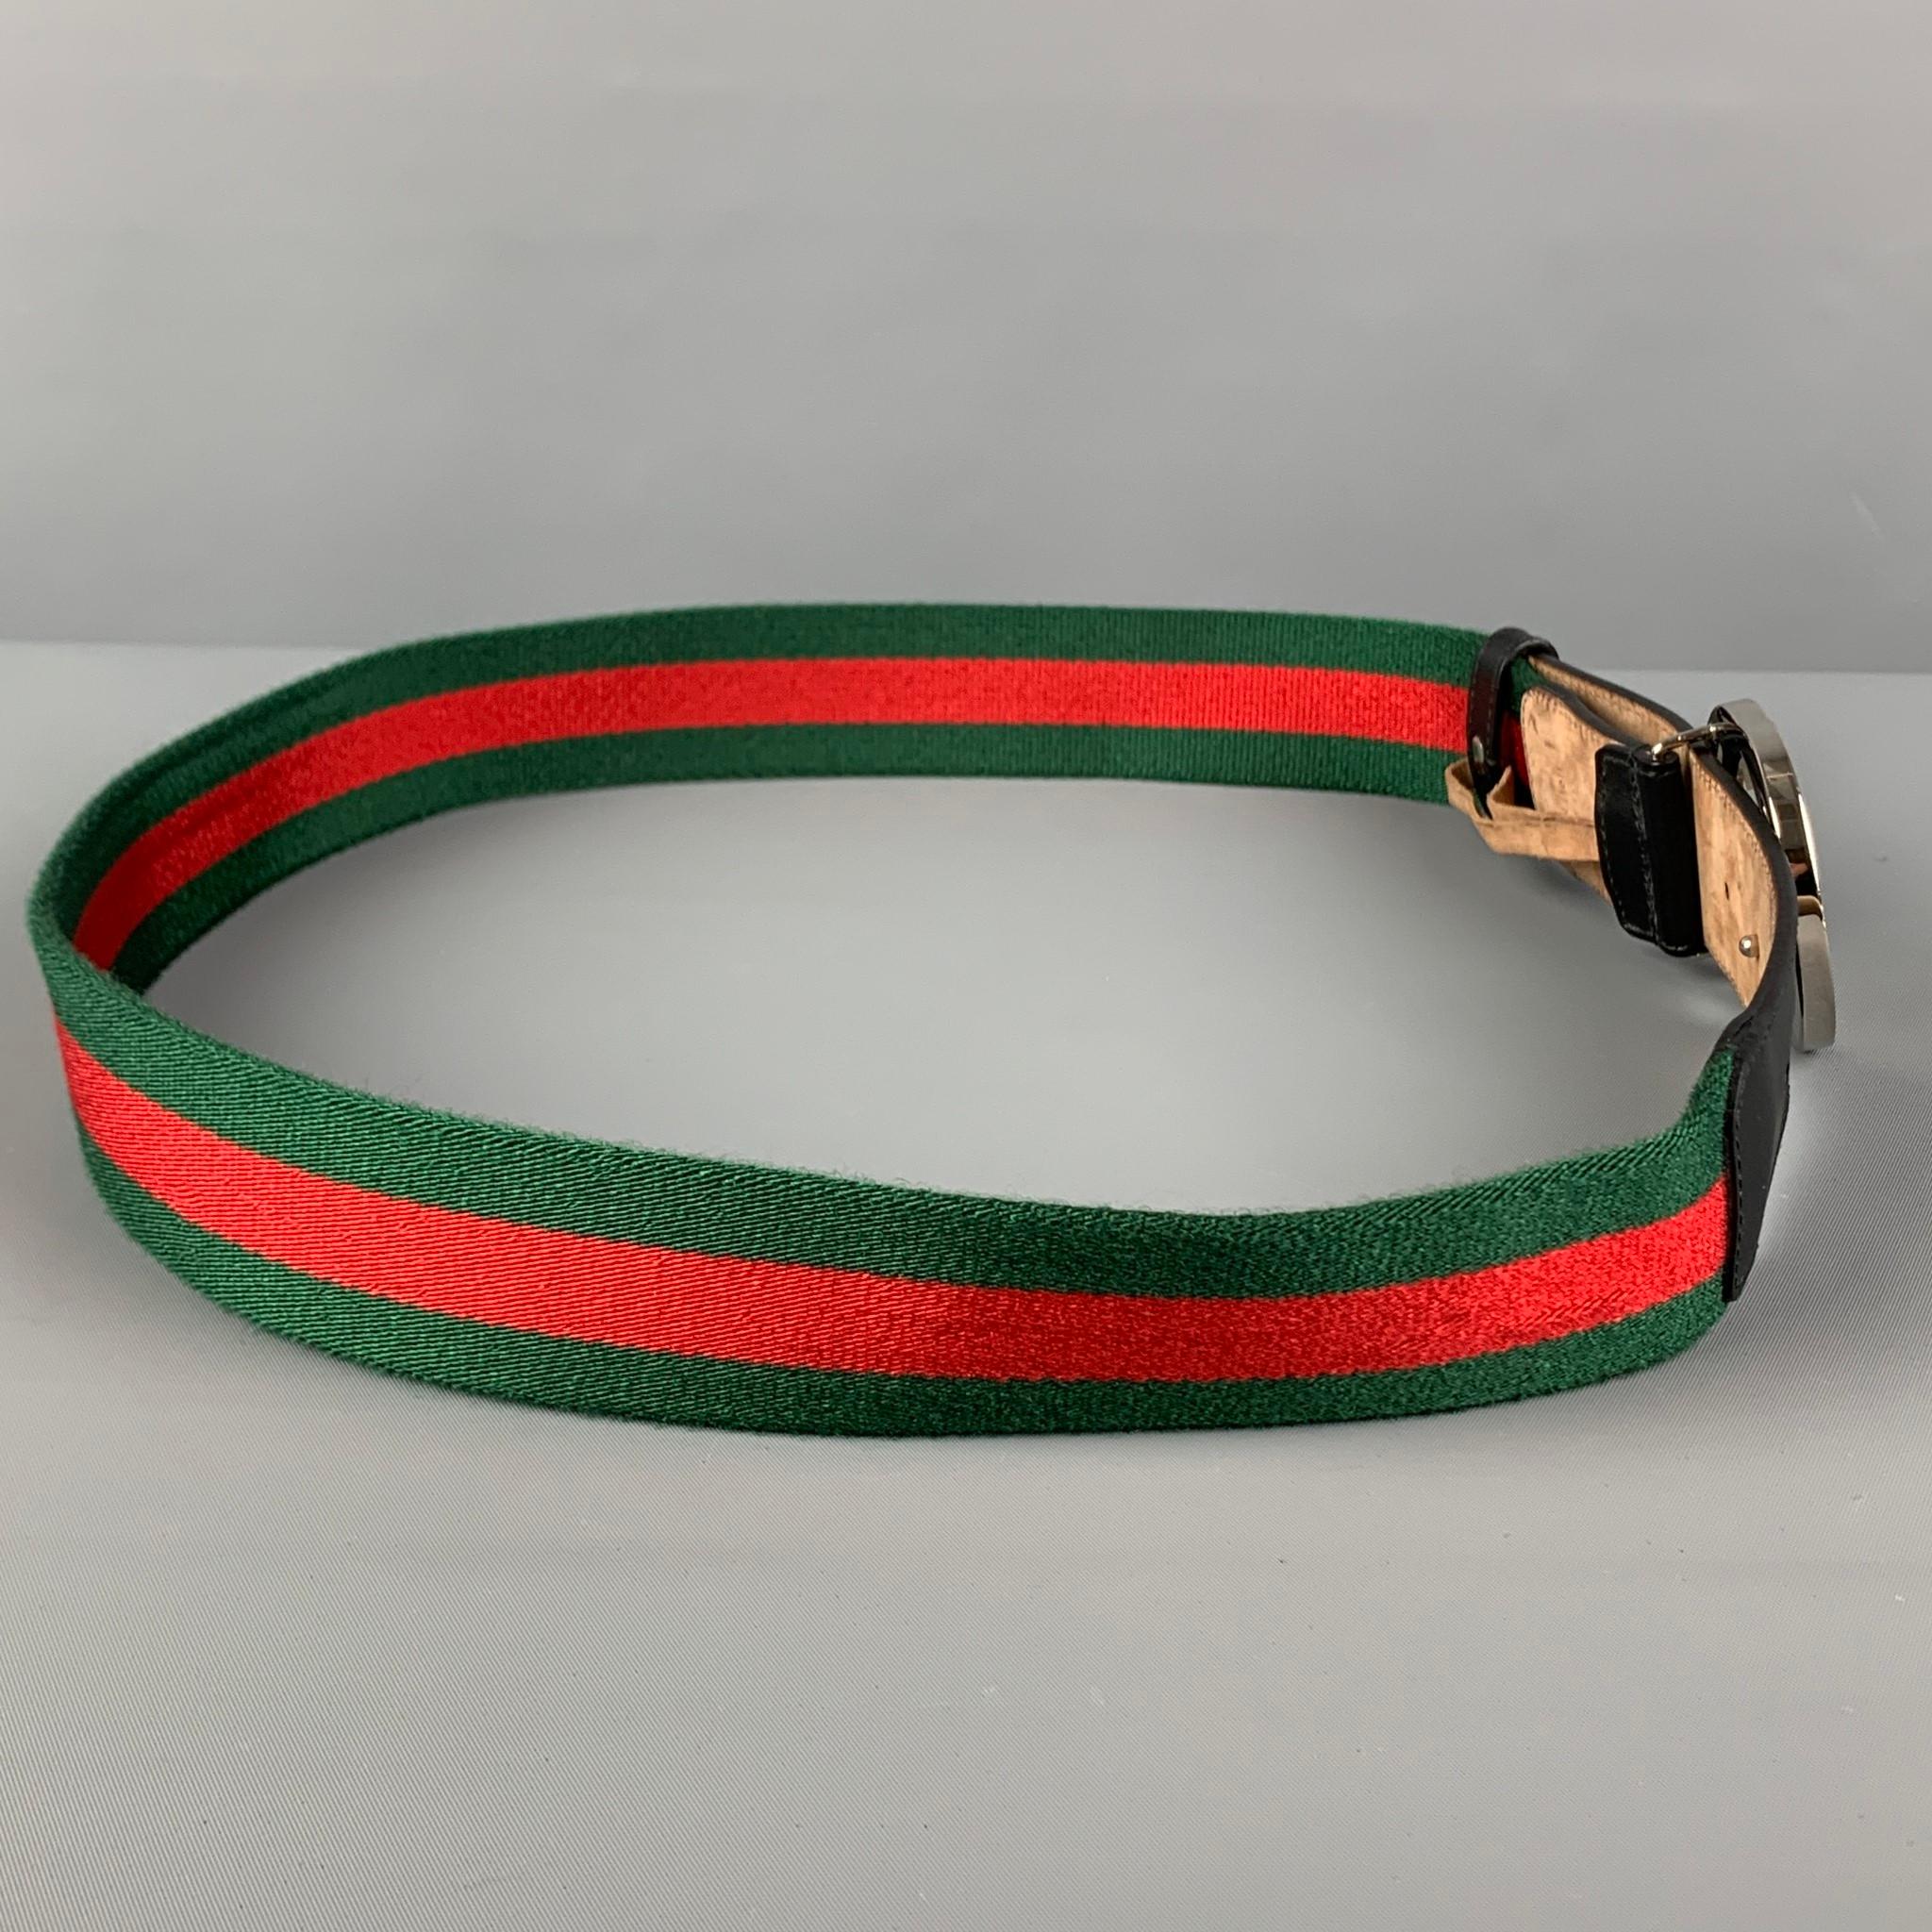 GUCCI belt comes in a green & red stripe material with a black leather trim featuring a silver tone 'GG' buckle closure. Made in Italy. 

Very Good Pre-Owned Condition.
Marked: 411924 H917N 95-38 525040

Length: 41.5 in.
Width: 1.5 in.
Fits: 35 in.